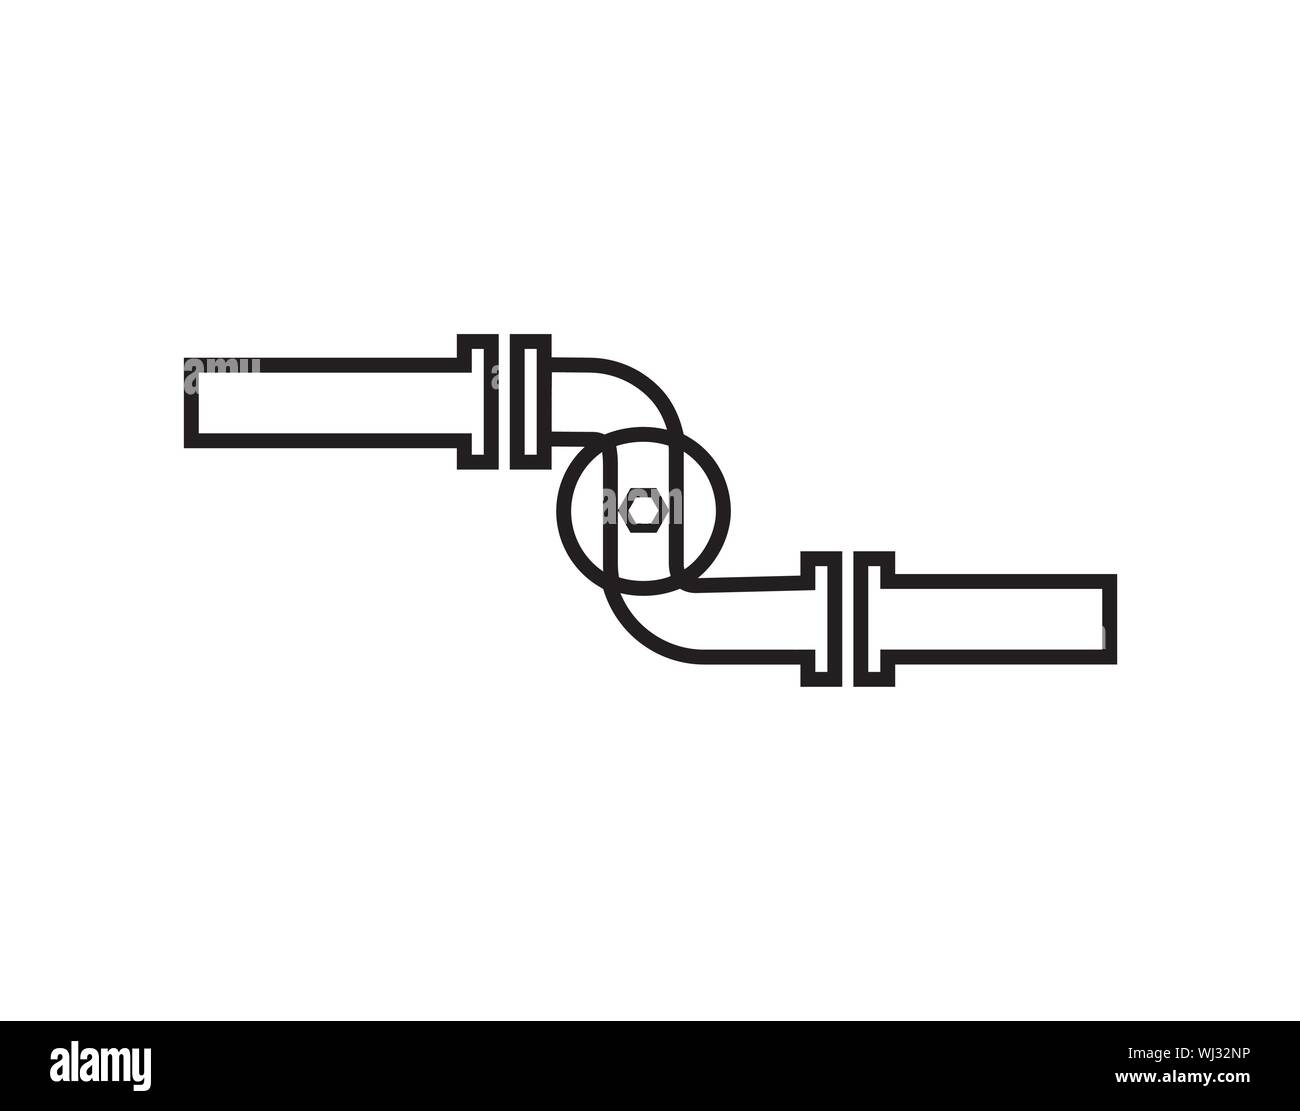 clogging tube icon. Plumbing element icon. Premium quality graphic design. Signs, outline symbols collection icon for websites, web design, mobile app Stock Vector